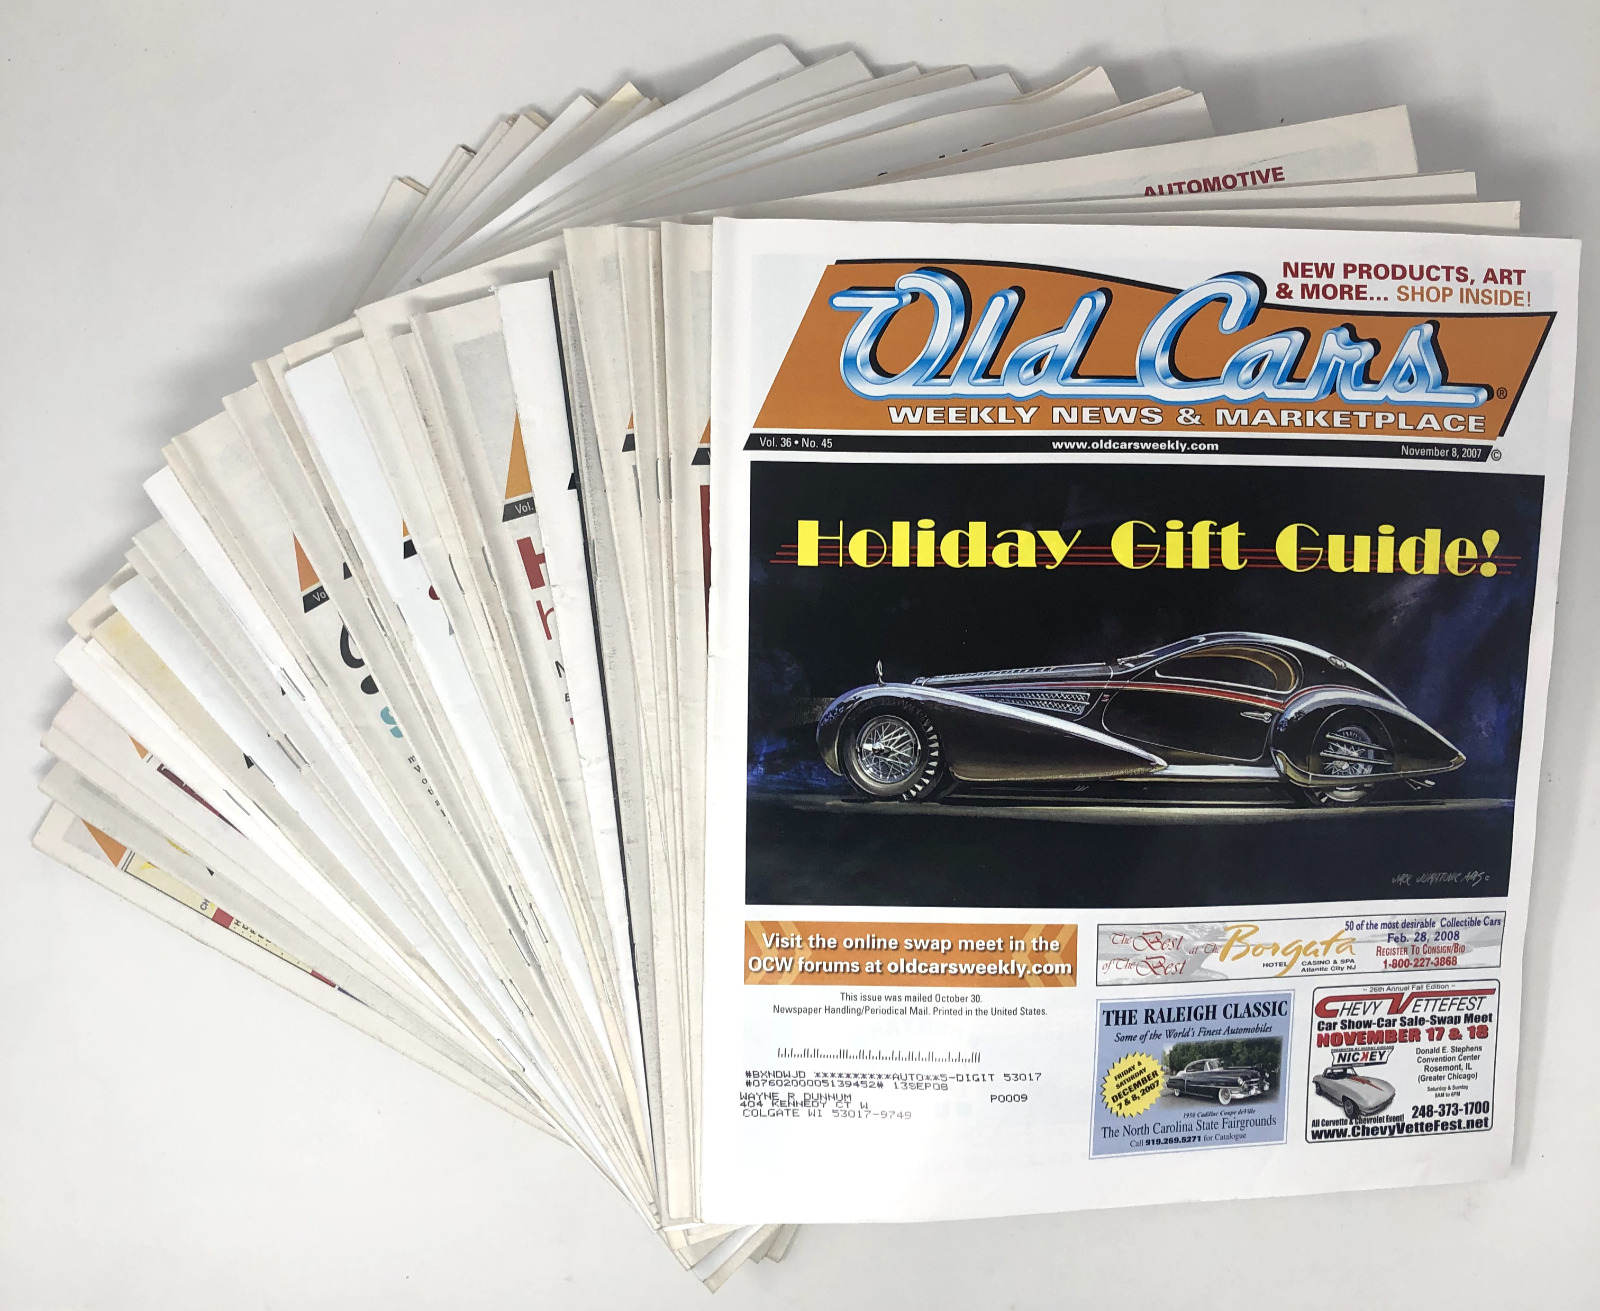 Lot of 41 Old Cars Weekly News and Marketplace 2007-2008 Iola WI Collectable Car